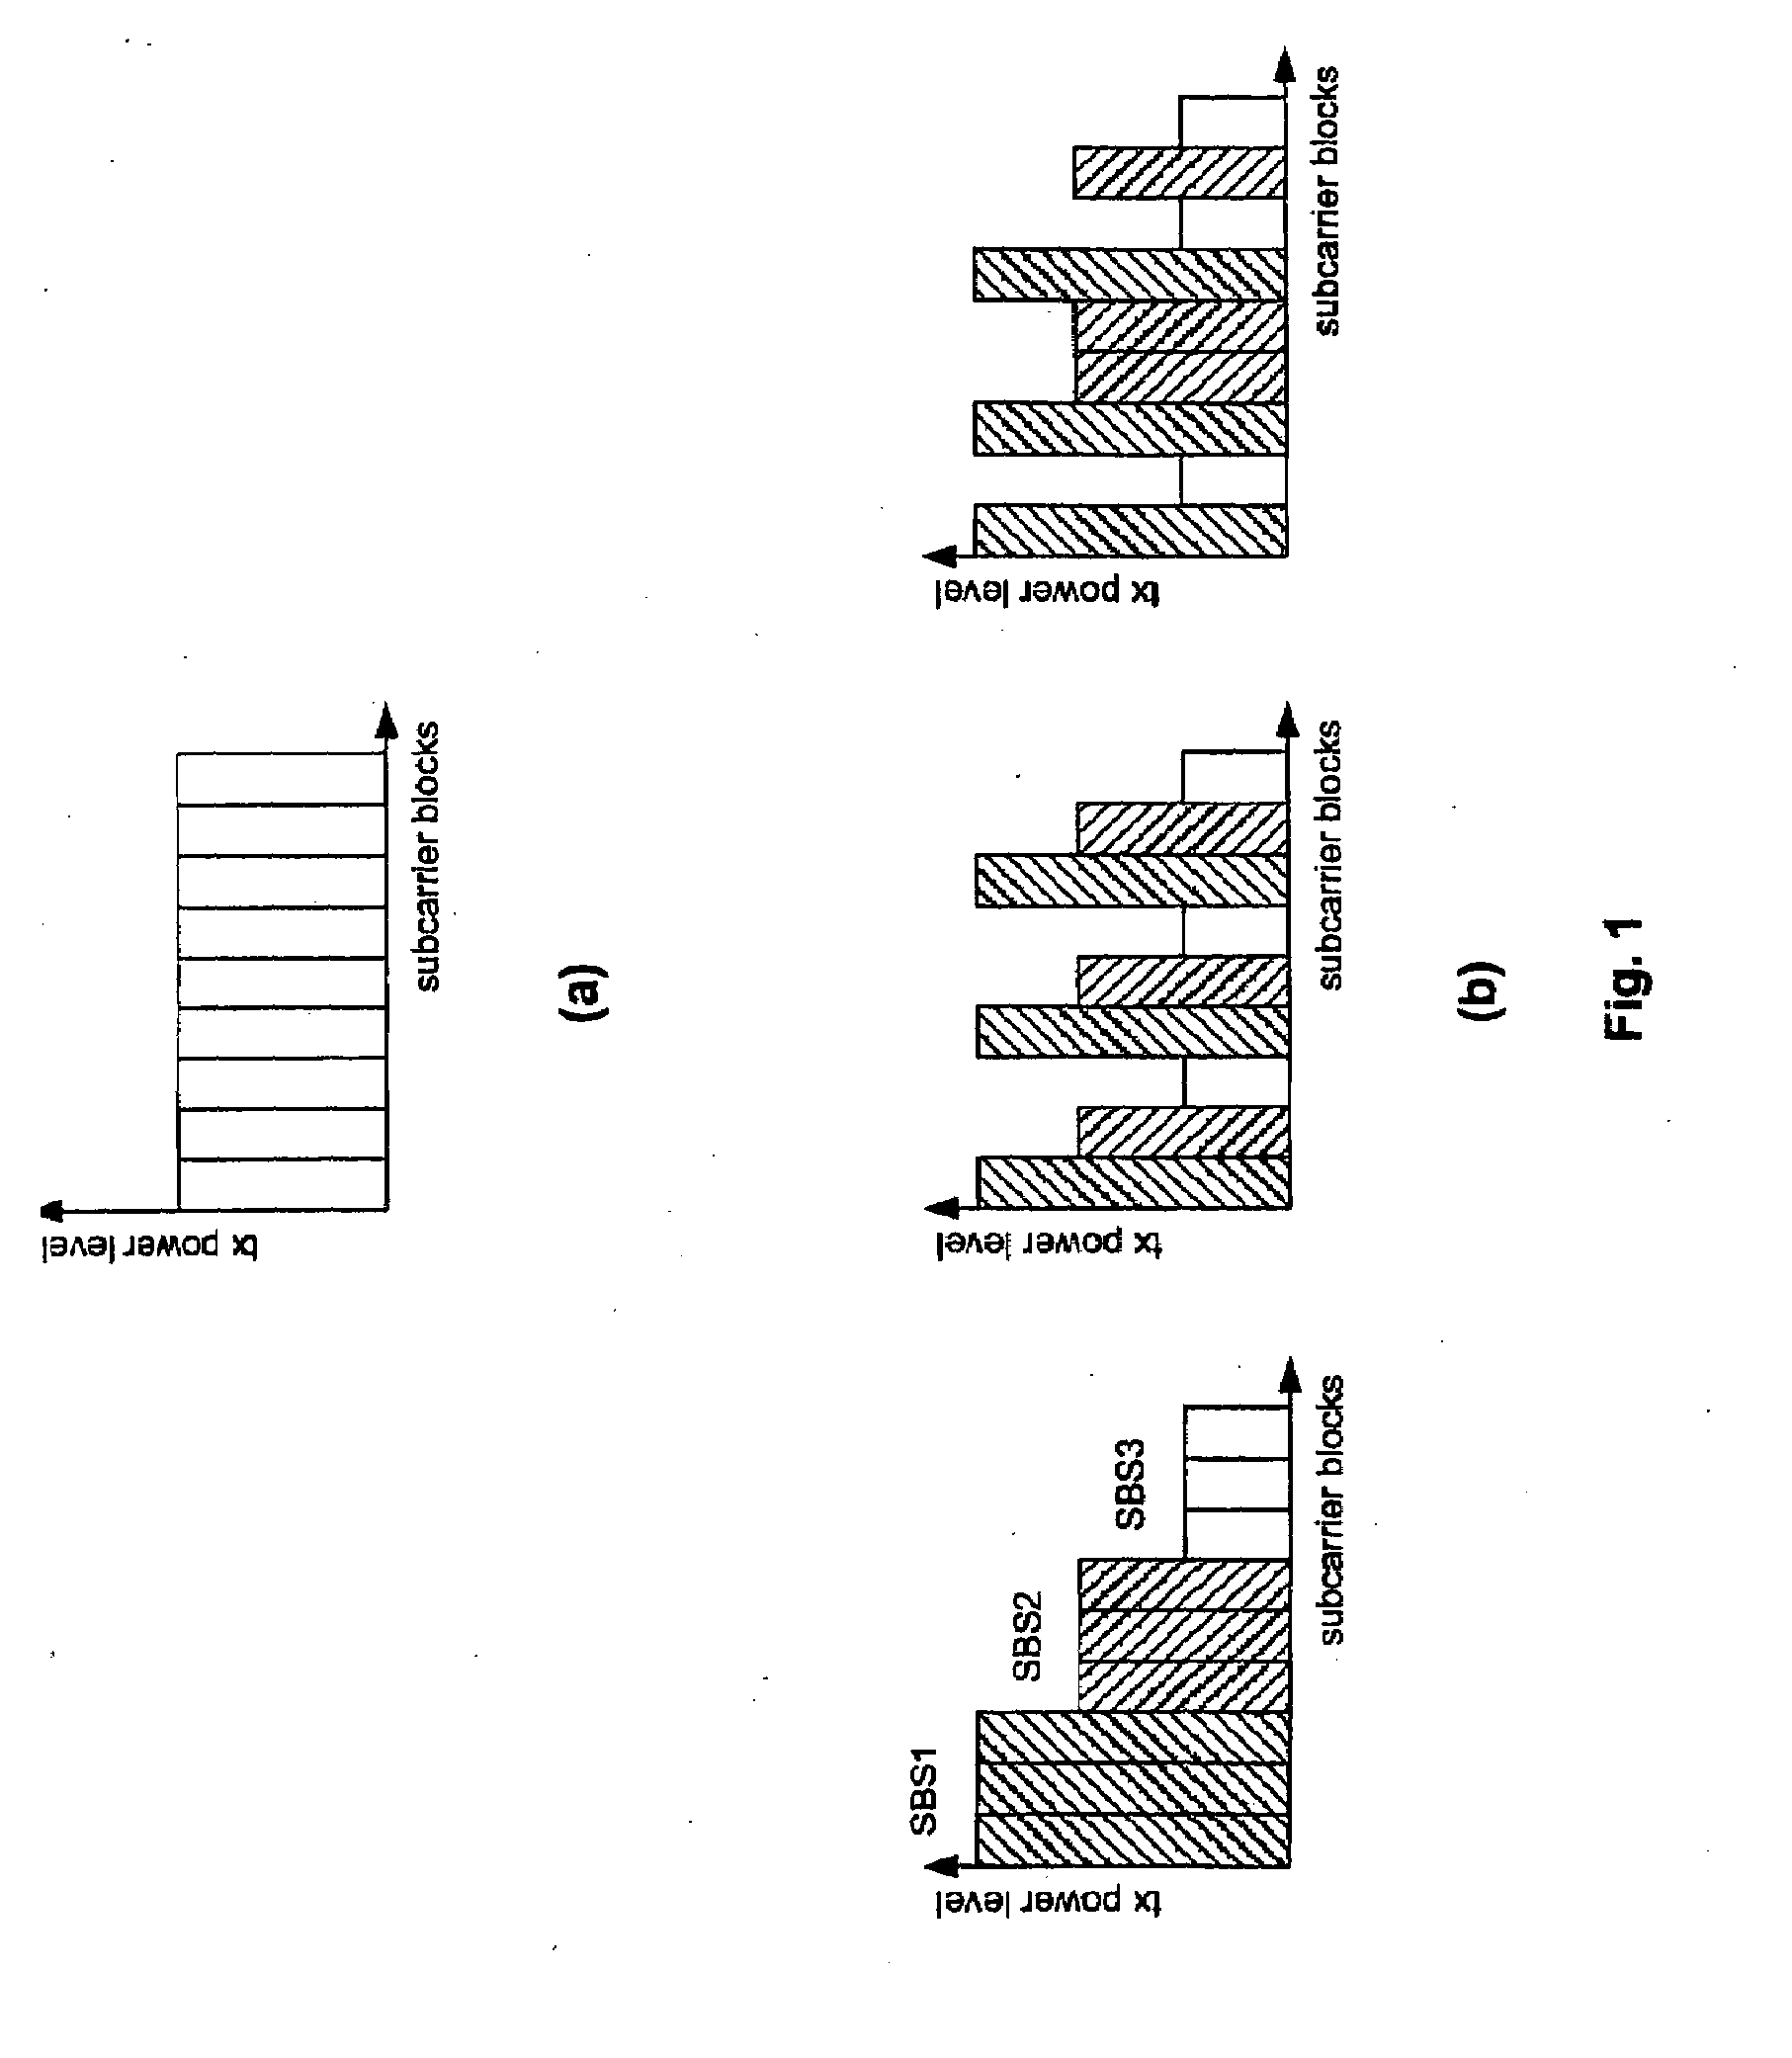 Transmission Power Level Setting During Channel Assignment for Interference Balancing in a Cellular Wireless Communication System